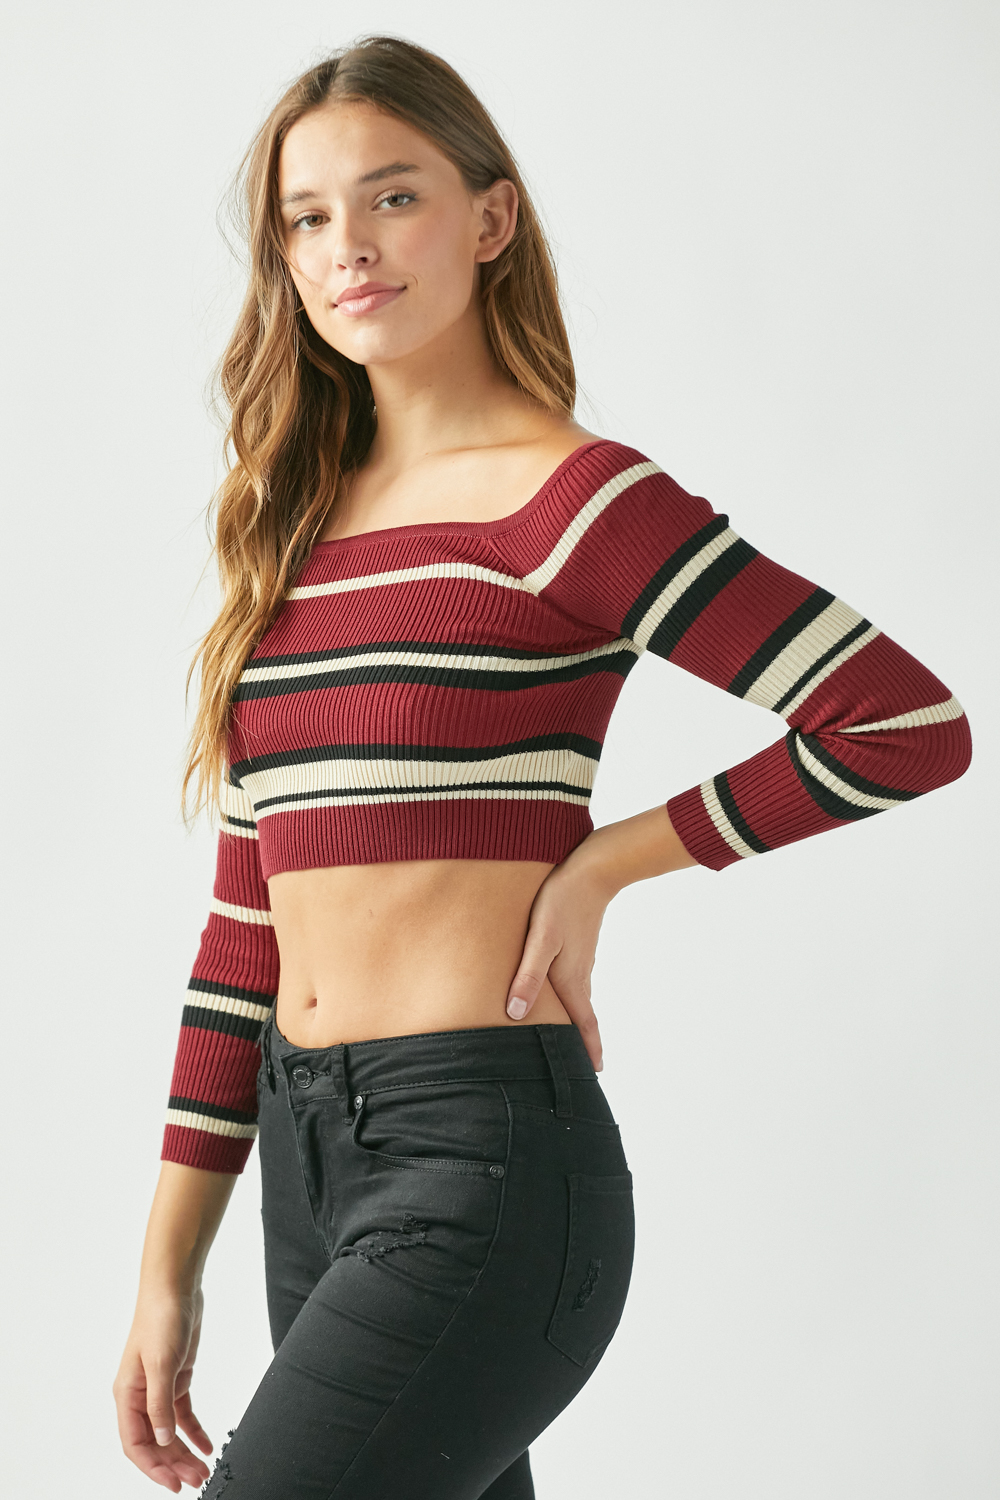 Striped Knit Long Sleeve Top 